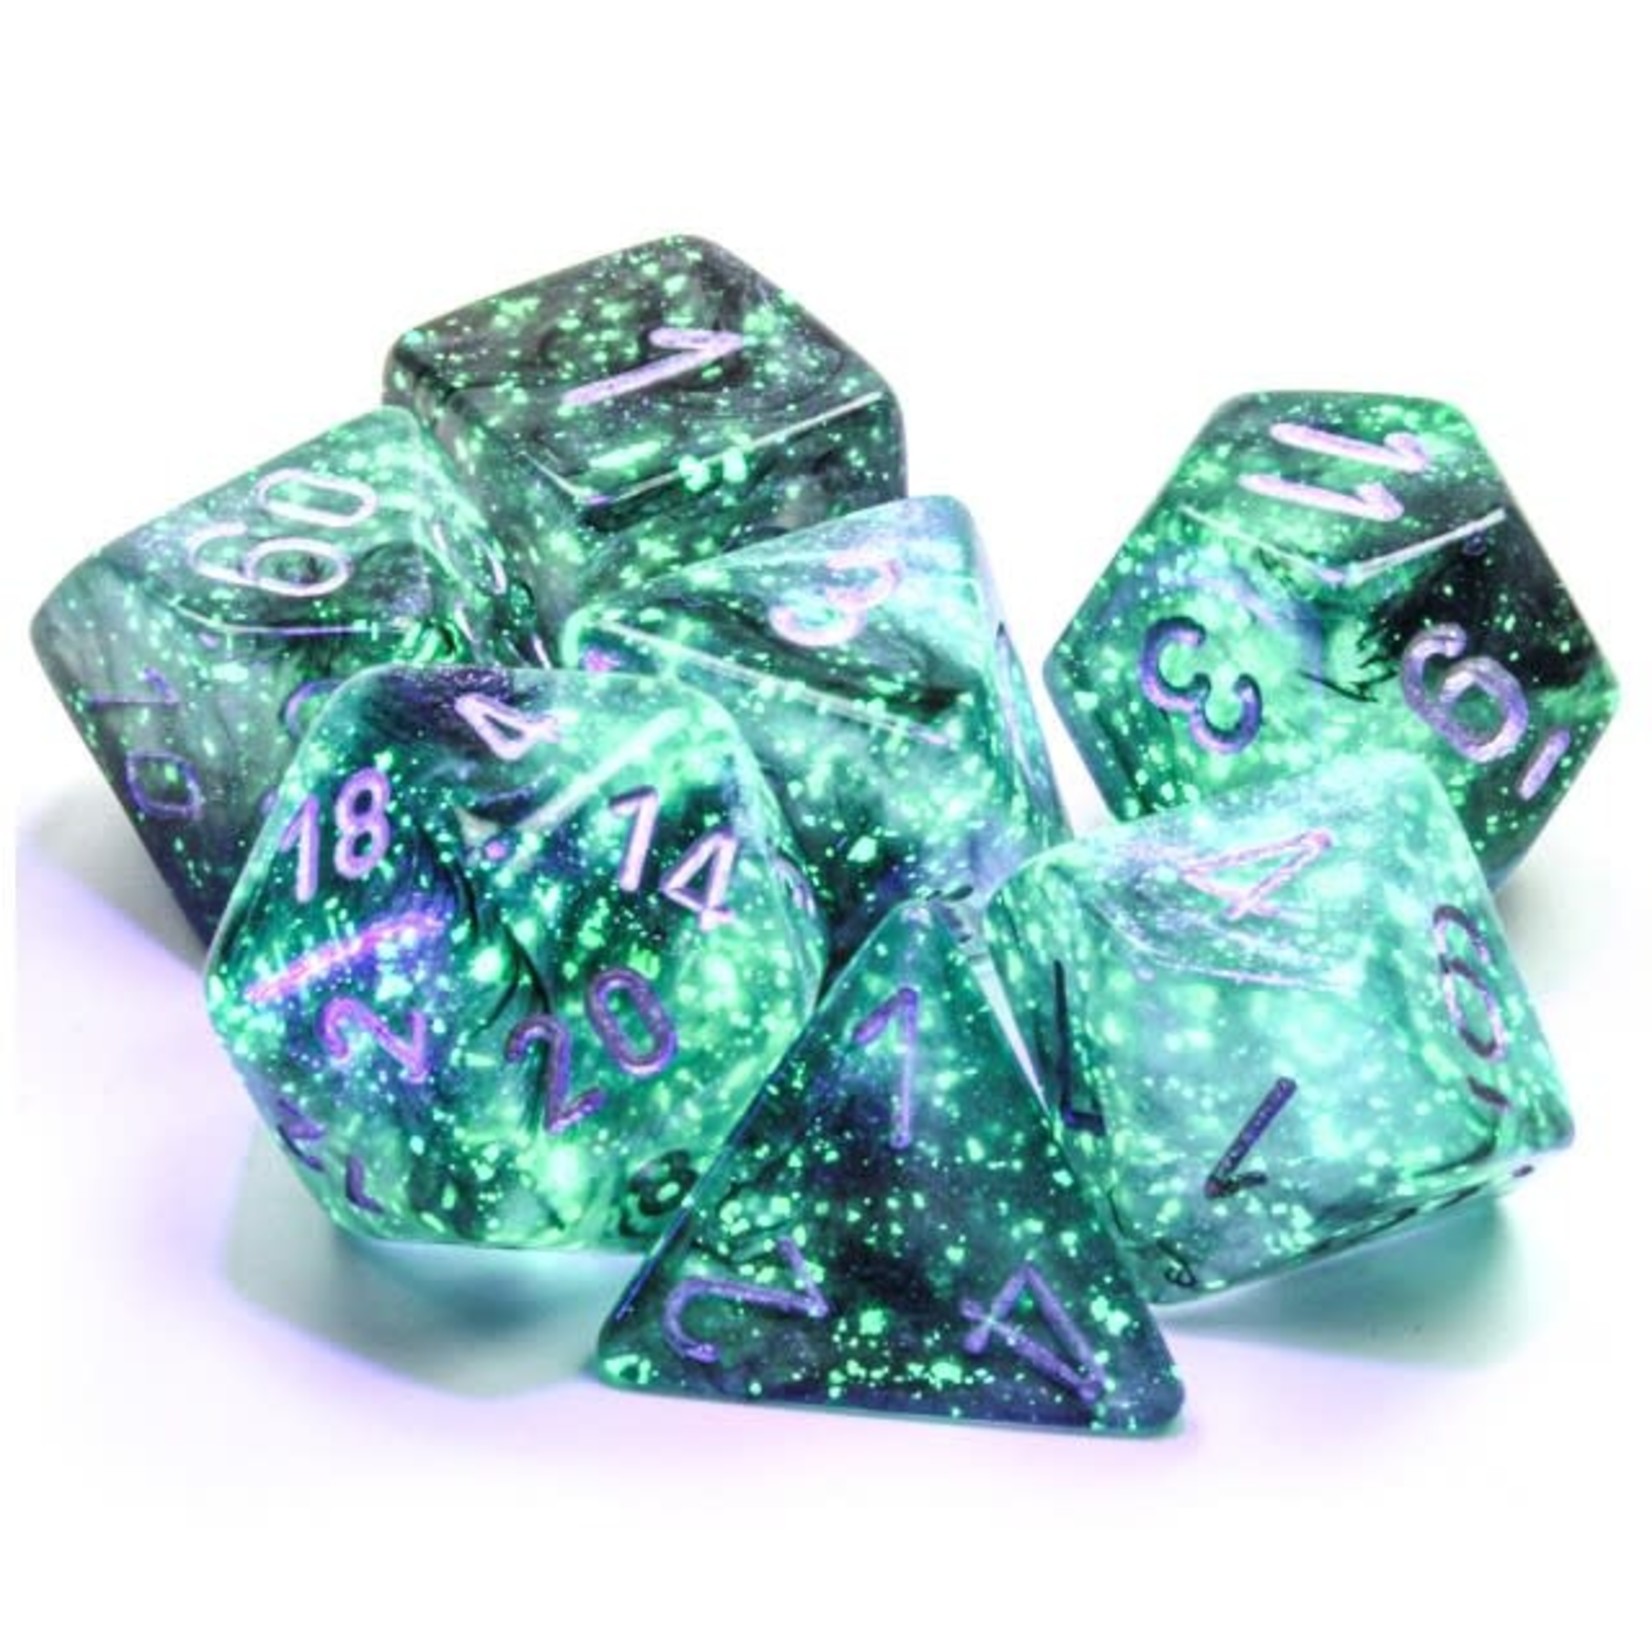 Chessex Chessex Borealis Light Smoke with Silver Luminary Polyhedral 7 die set